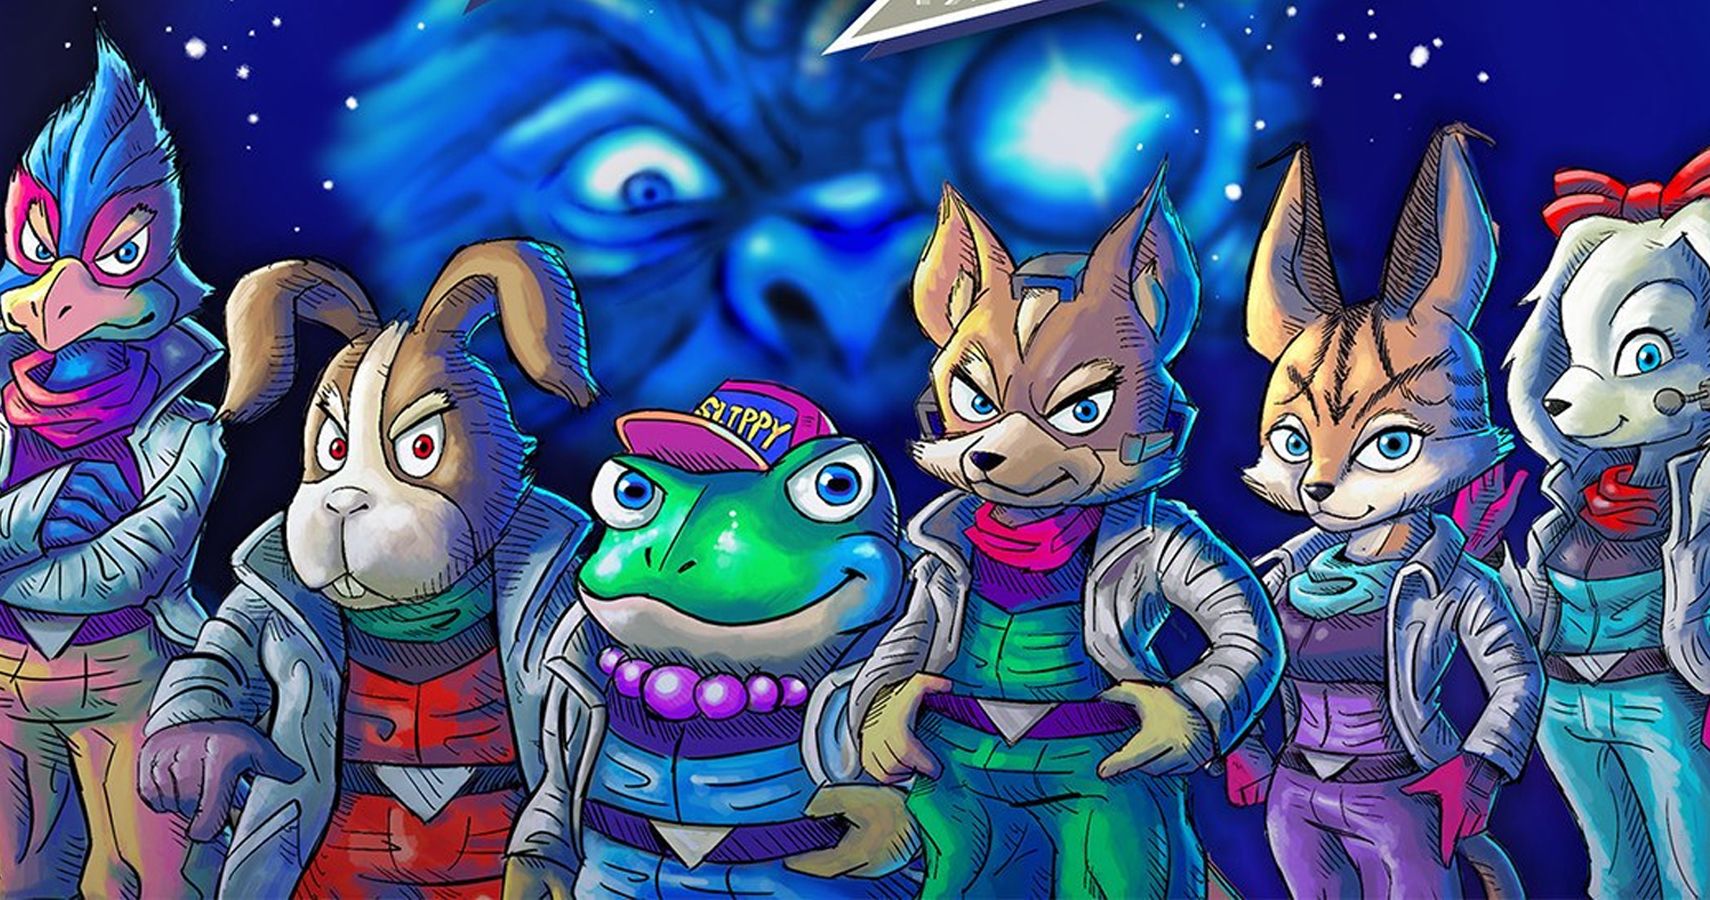 Nintendo Switch Online is adding 'Star Fox 2' and Super Punch Out!!